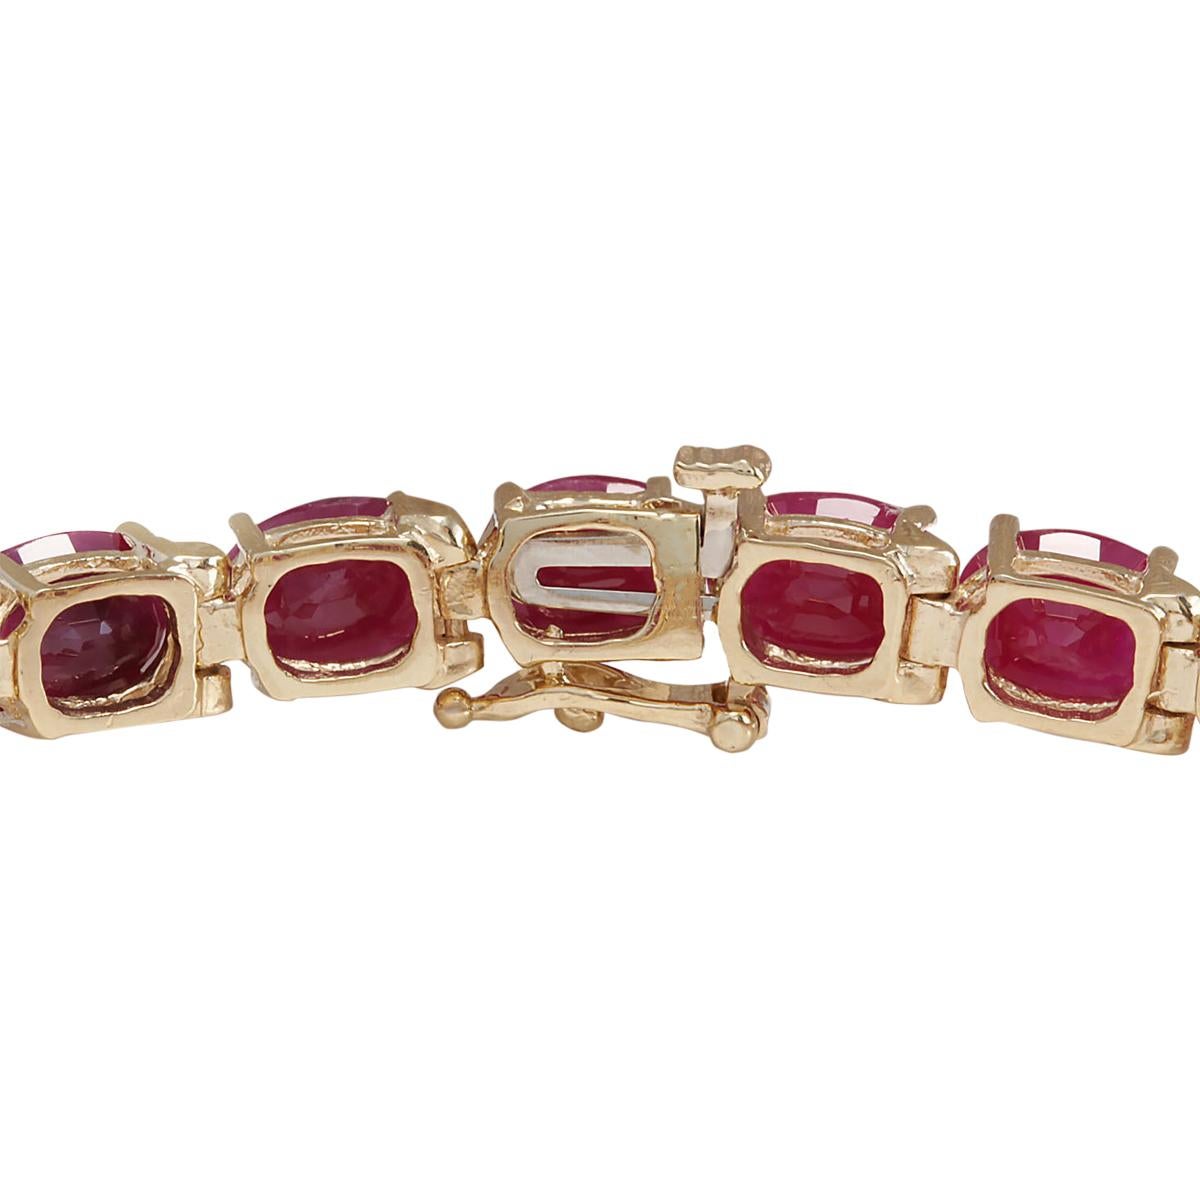 30.89 Carat Ruby 14 Karat Yellow Gold Bracelet
Stamped: 14K Yellow Gold
Total Bracelet Weight: 14.0 Grams
Bracelet Length: 7 Inches
Bracelet Width: 6.00 mm
Total  Ruby Weight is 30.89 Carat (Measures: 8.00x6.00 mm)
Color: Red
Sku: [703725W]